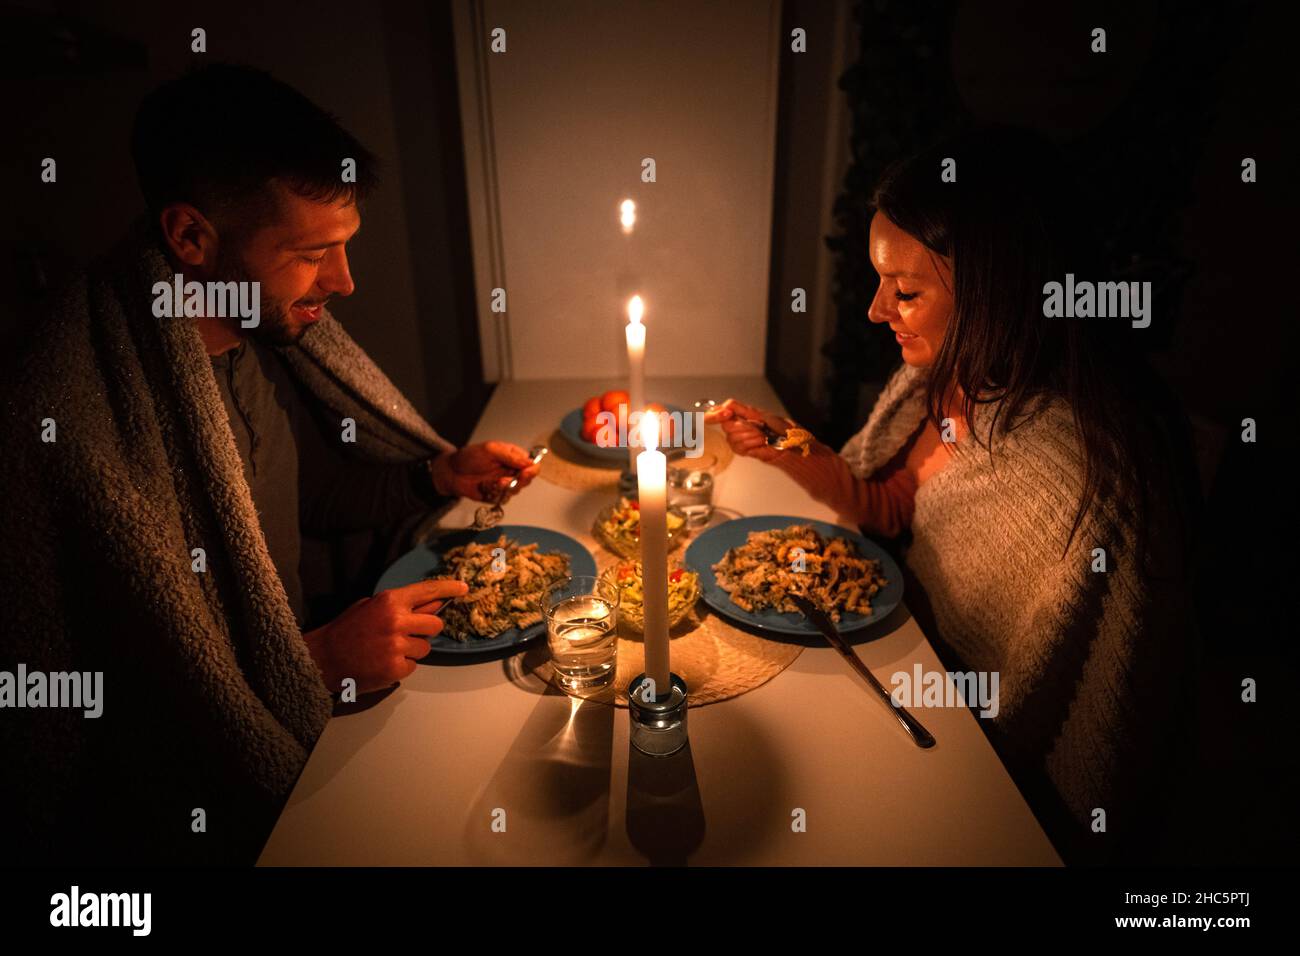 https://c8.alamy.com/comp/2HC5PTJ/couple-having-dinner-at-home-during-power-outage-blackout-no-electricity-2HC5PTJ.jpg